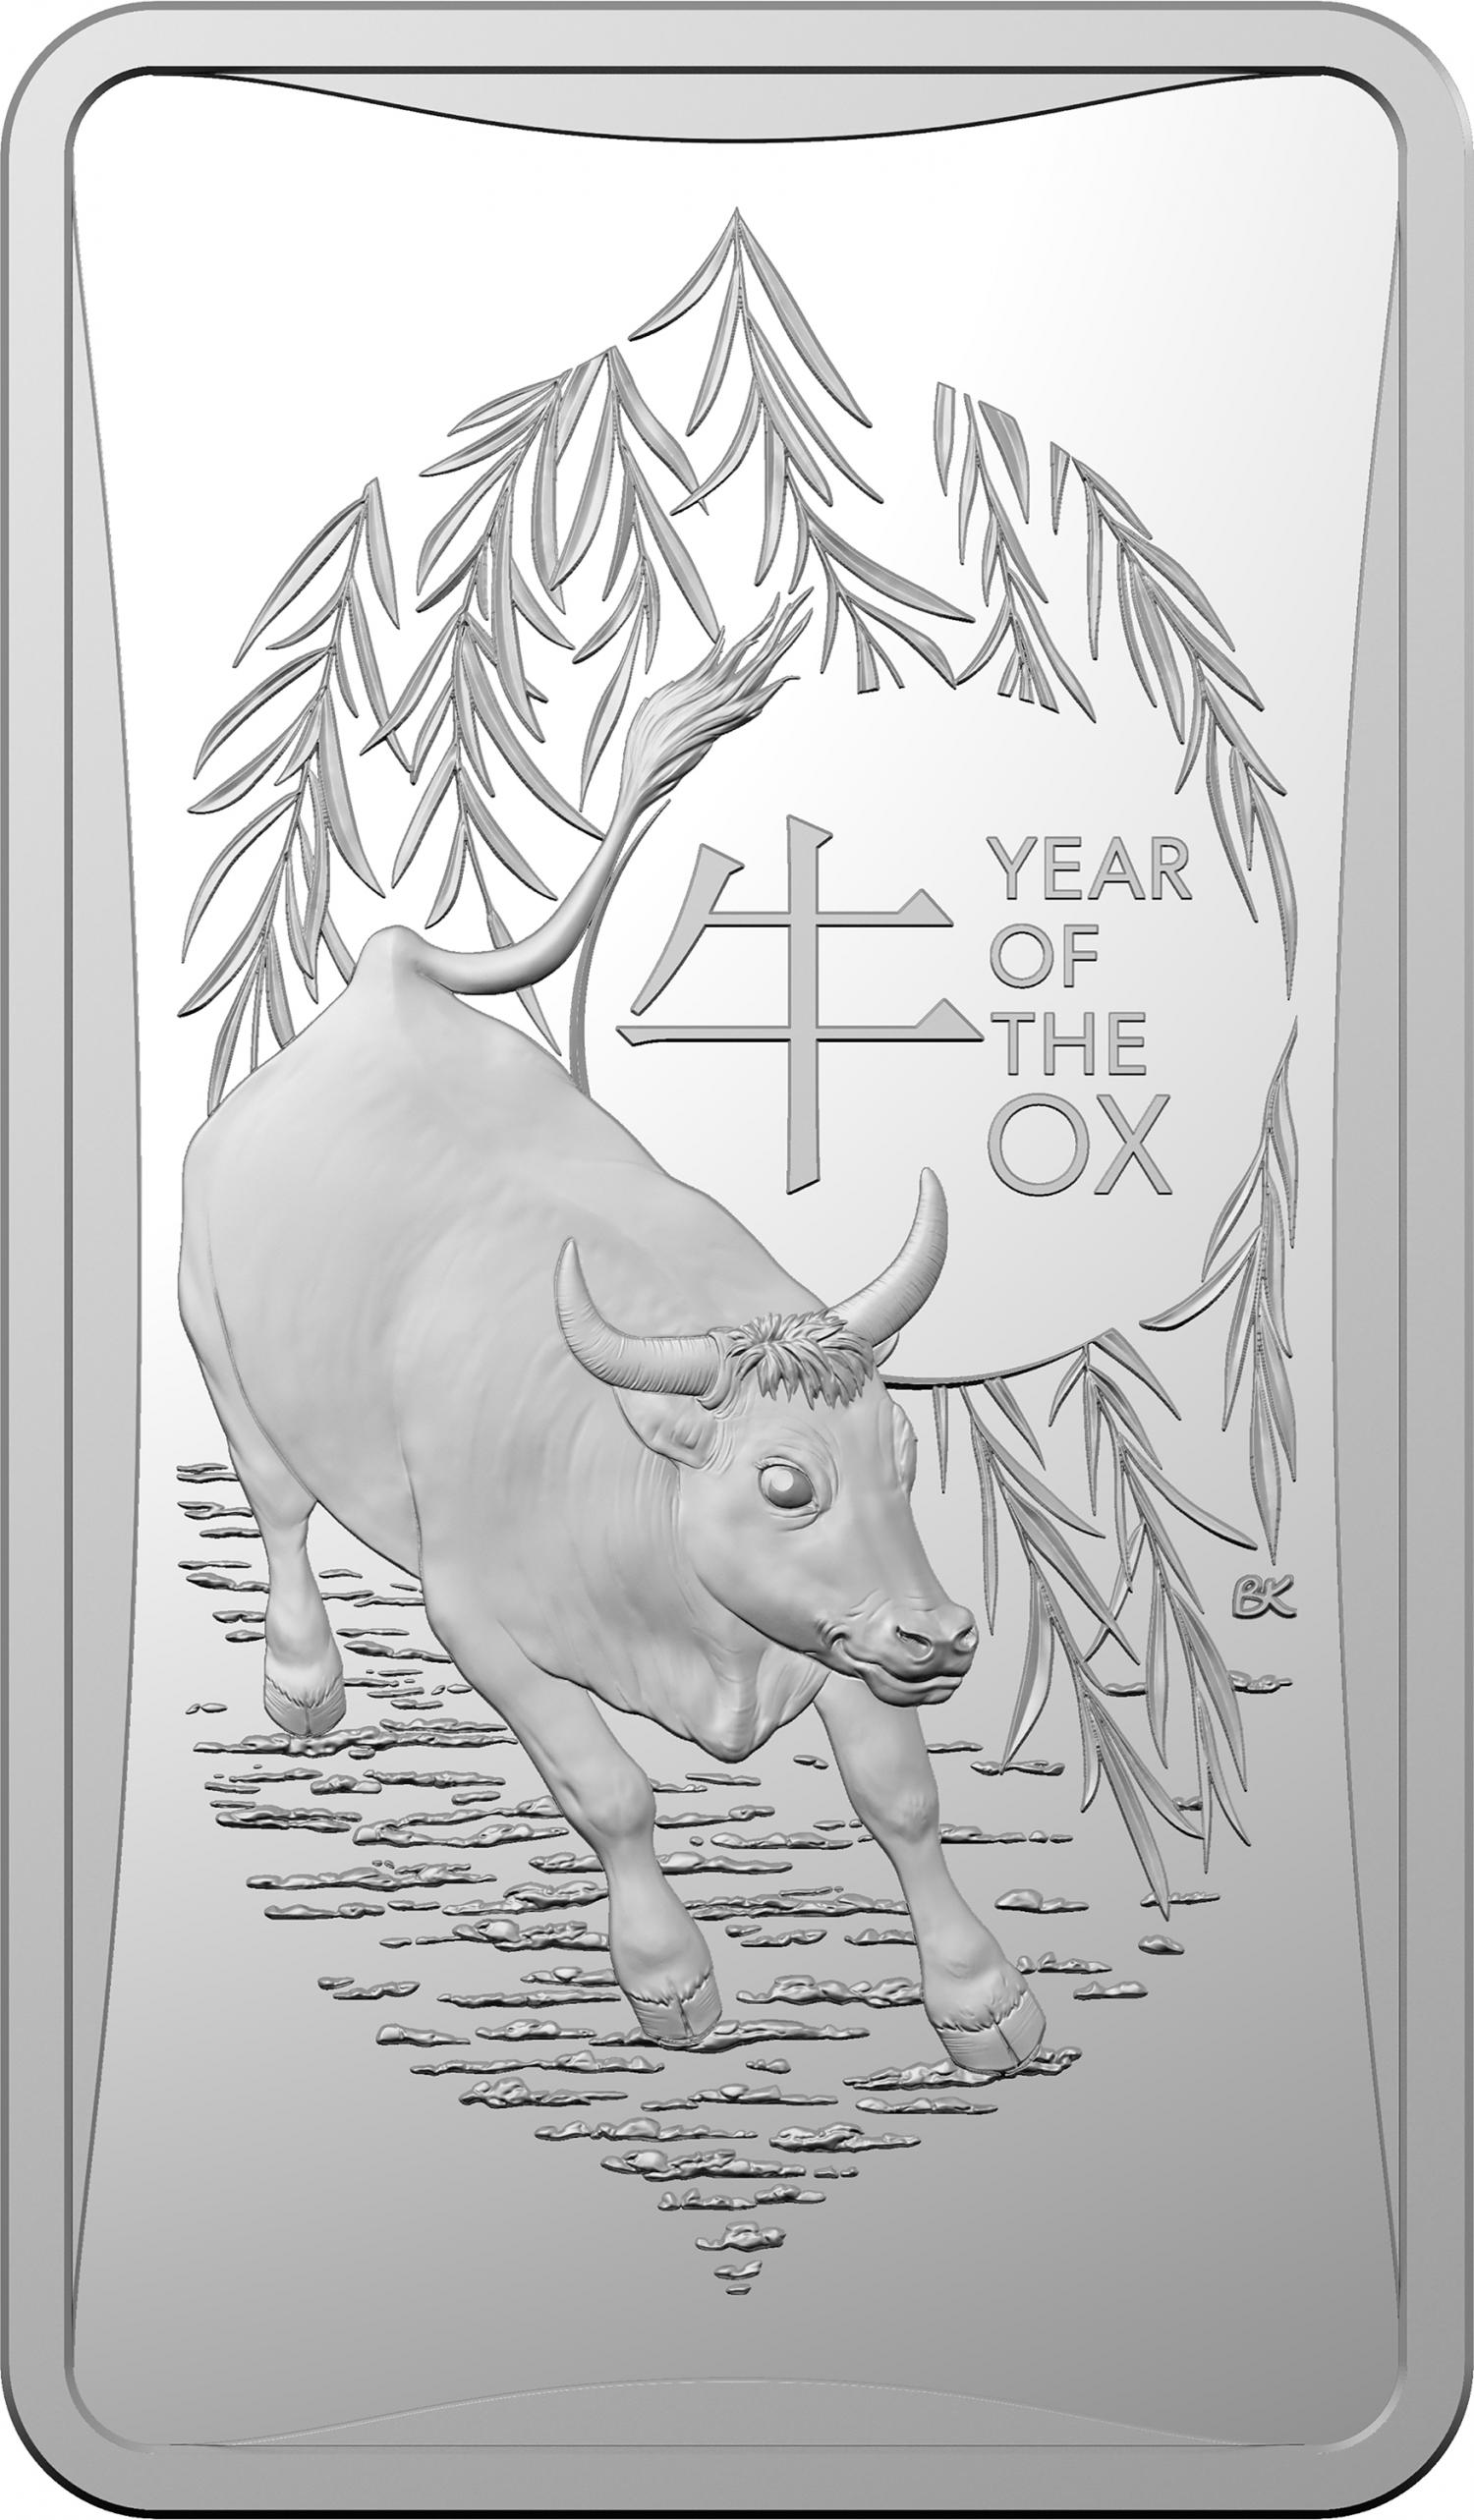 Thumbnail for 2021 Lunar Year of the Ox $1 Half oz Silver Frosted UNC INGOT in Box